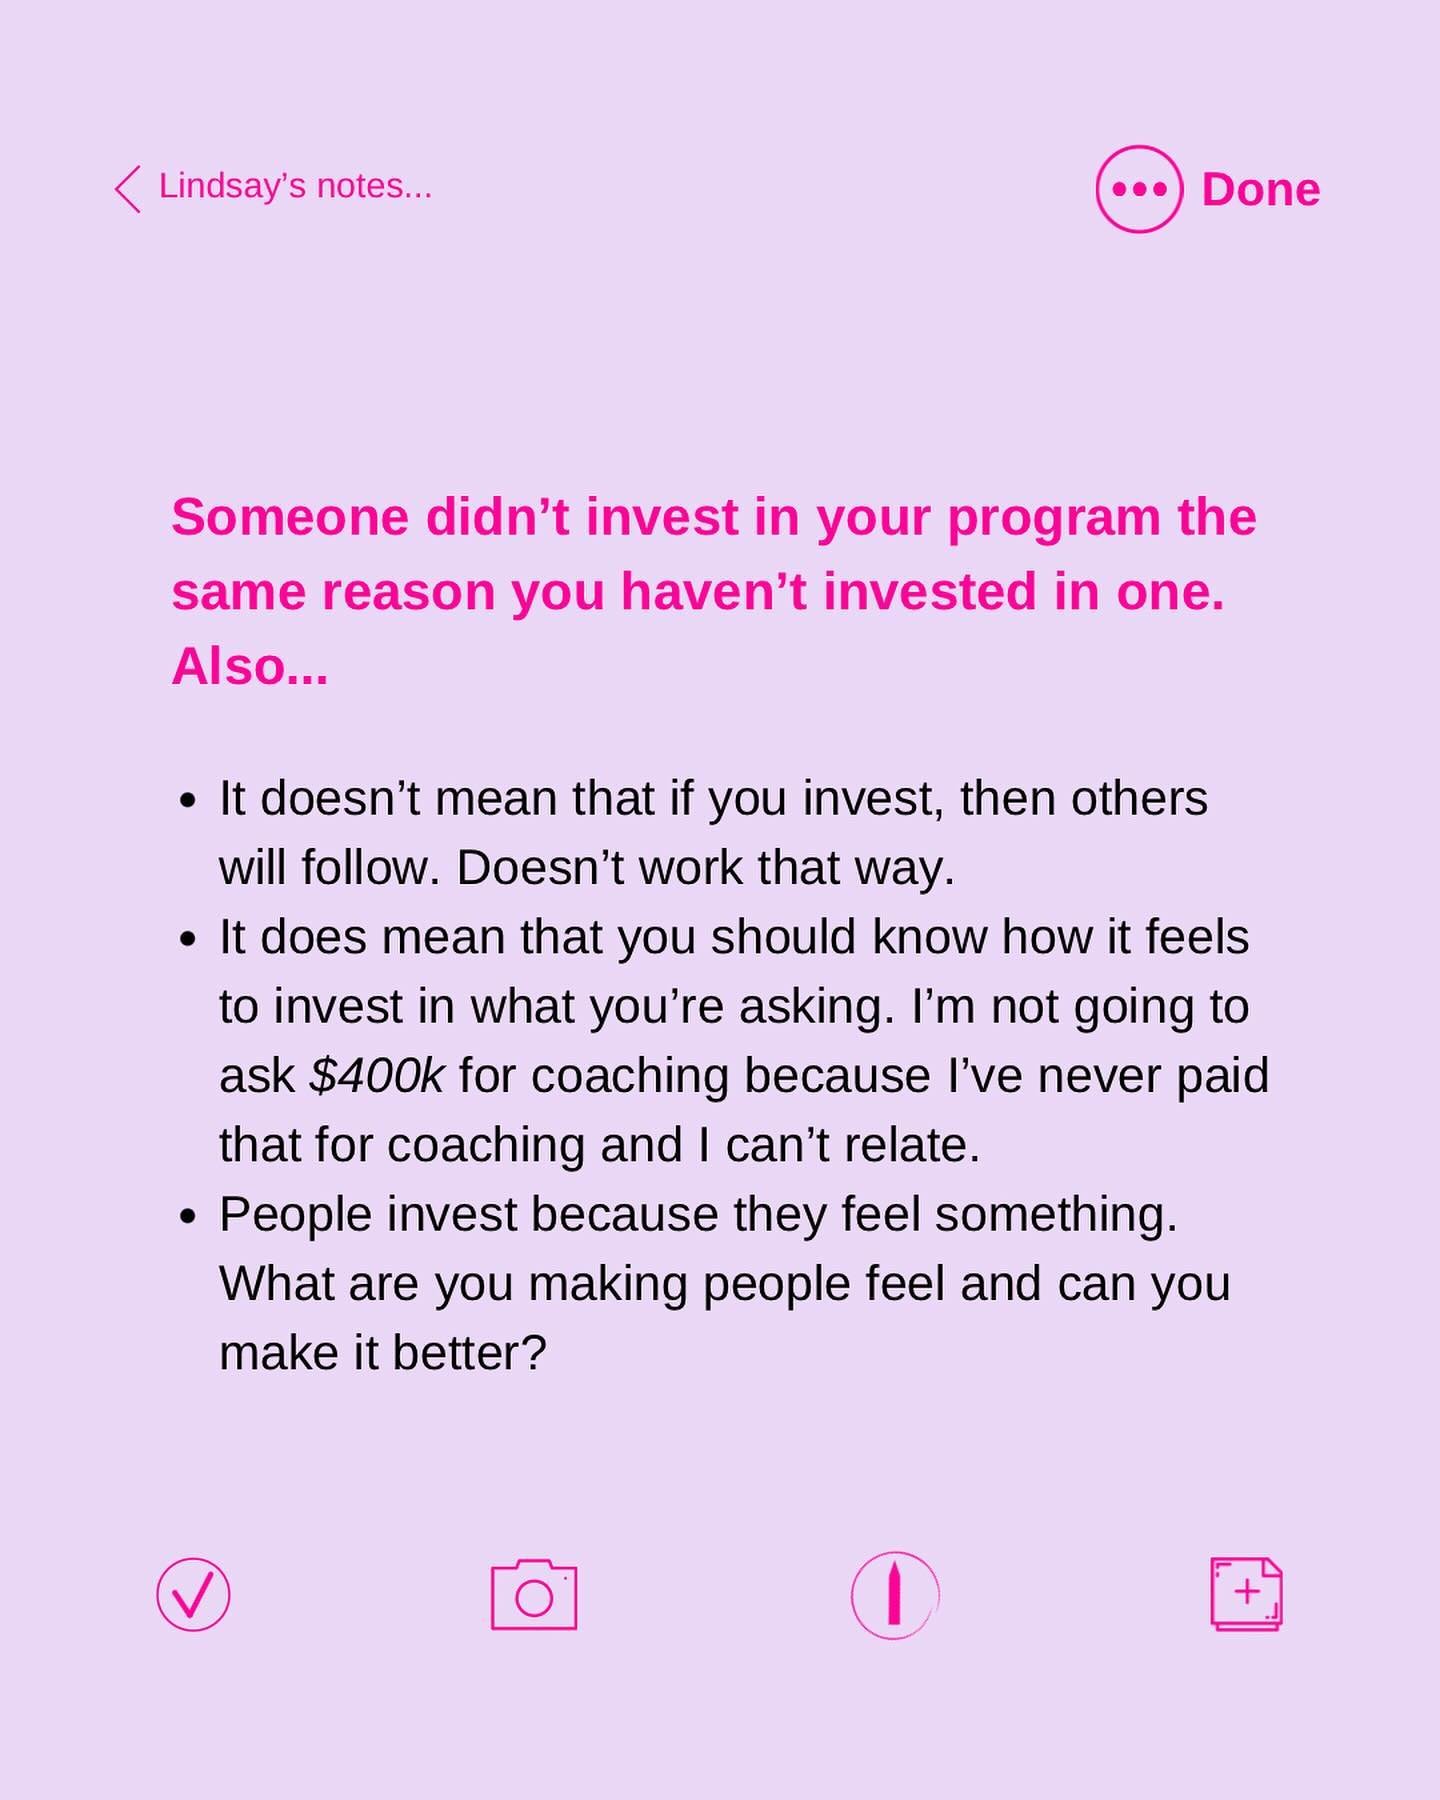 📣 Someone didn&rsquo;t invest in your program the same reason you haven&rsquo;t invested in one. Also...

📌 It doesn&rsquo;t mean that if you invest, then others will follow. Doesn&rsquo;t work that way. 

📌 It does mean that you should know how i